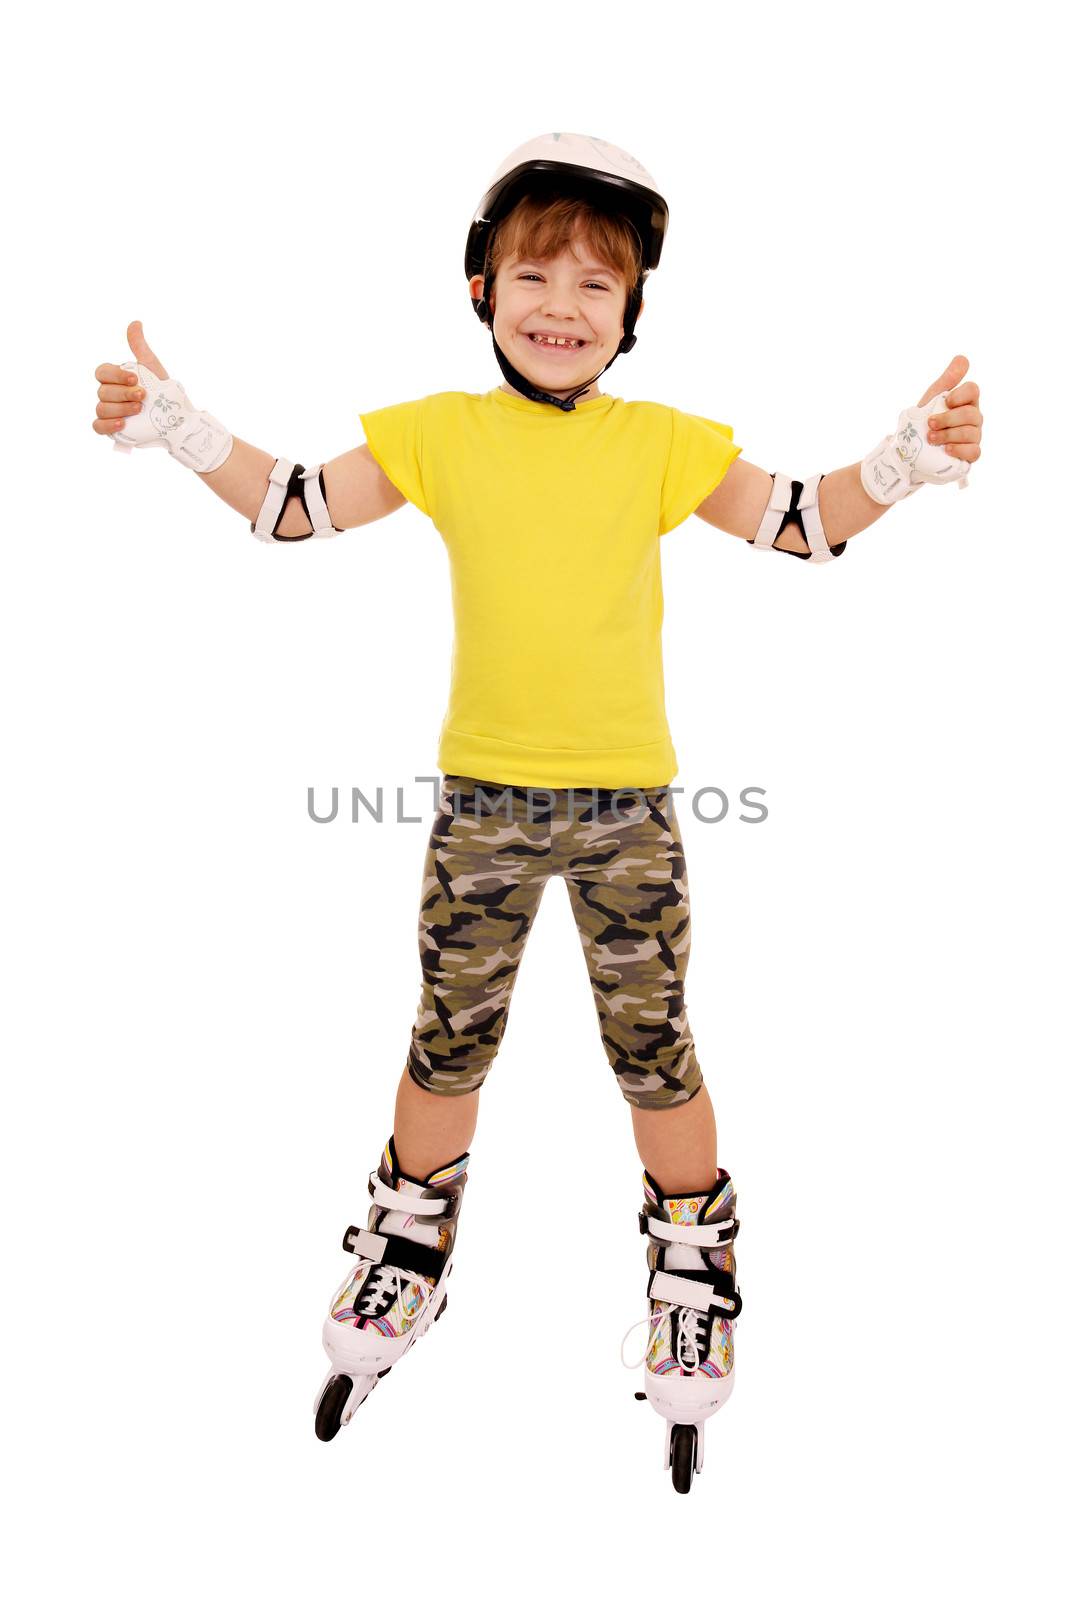 little girl with roller skates and thumbs up by goce